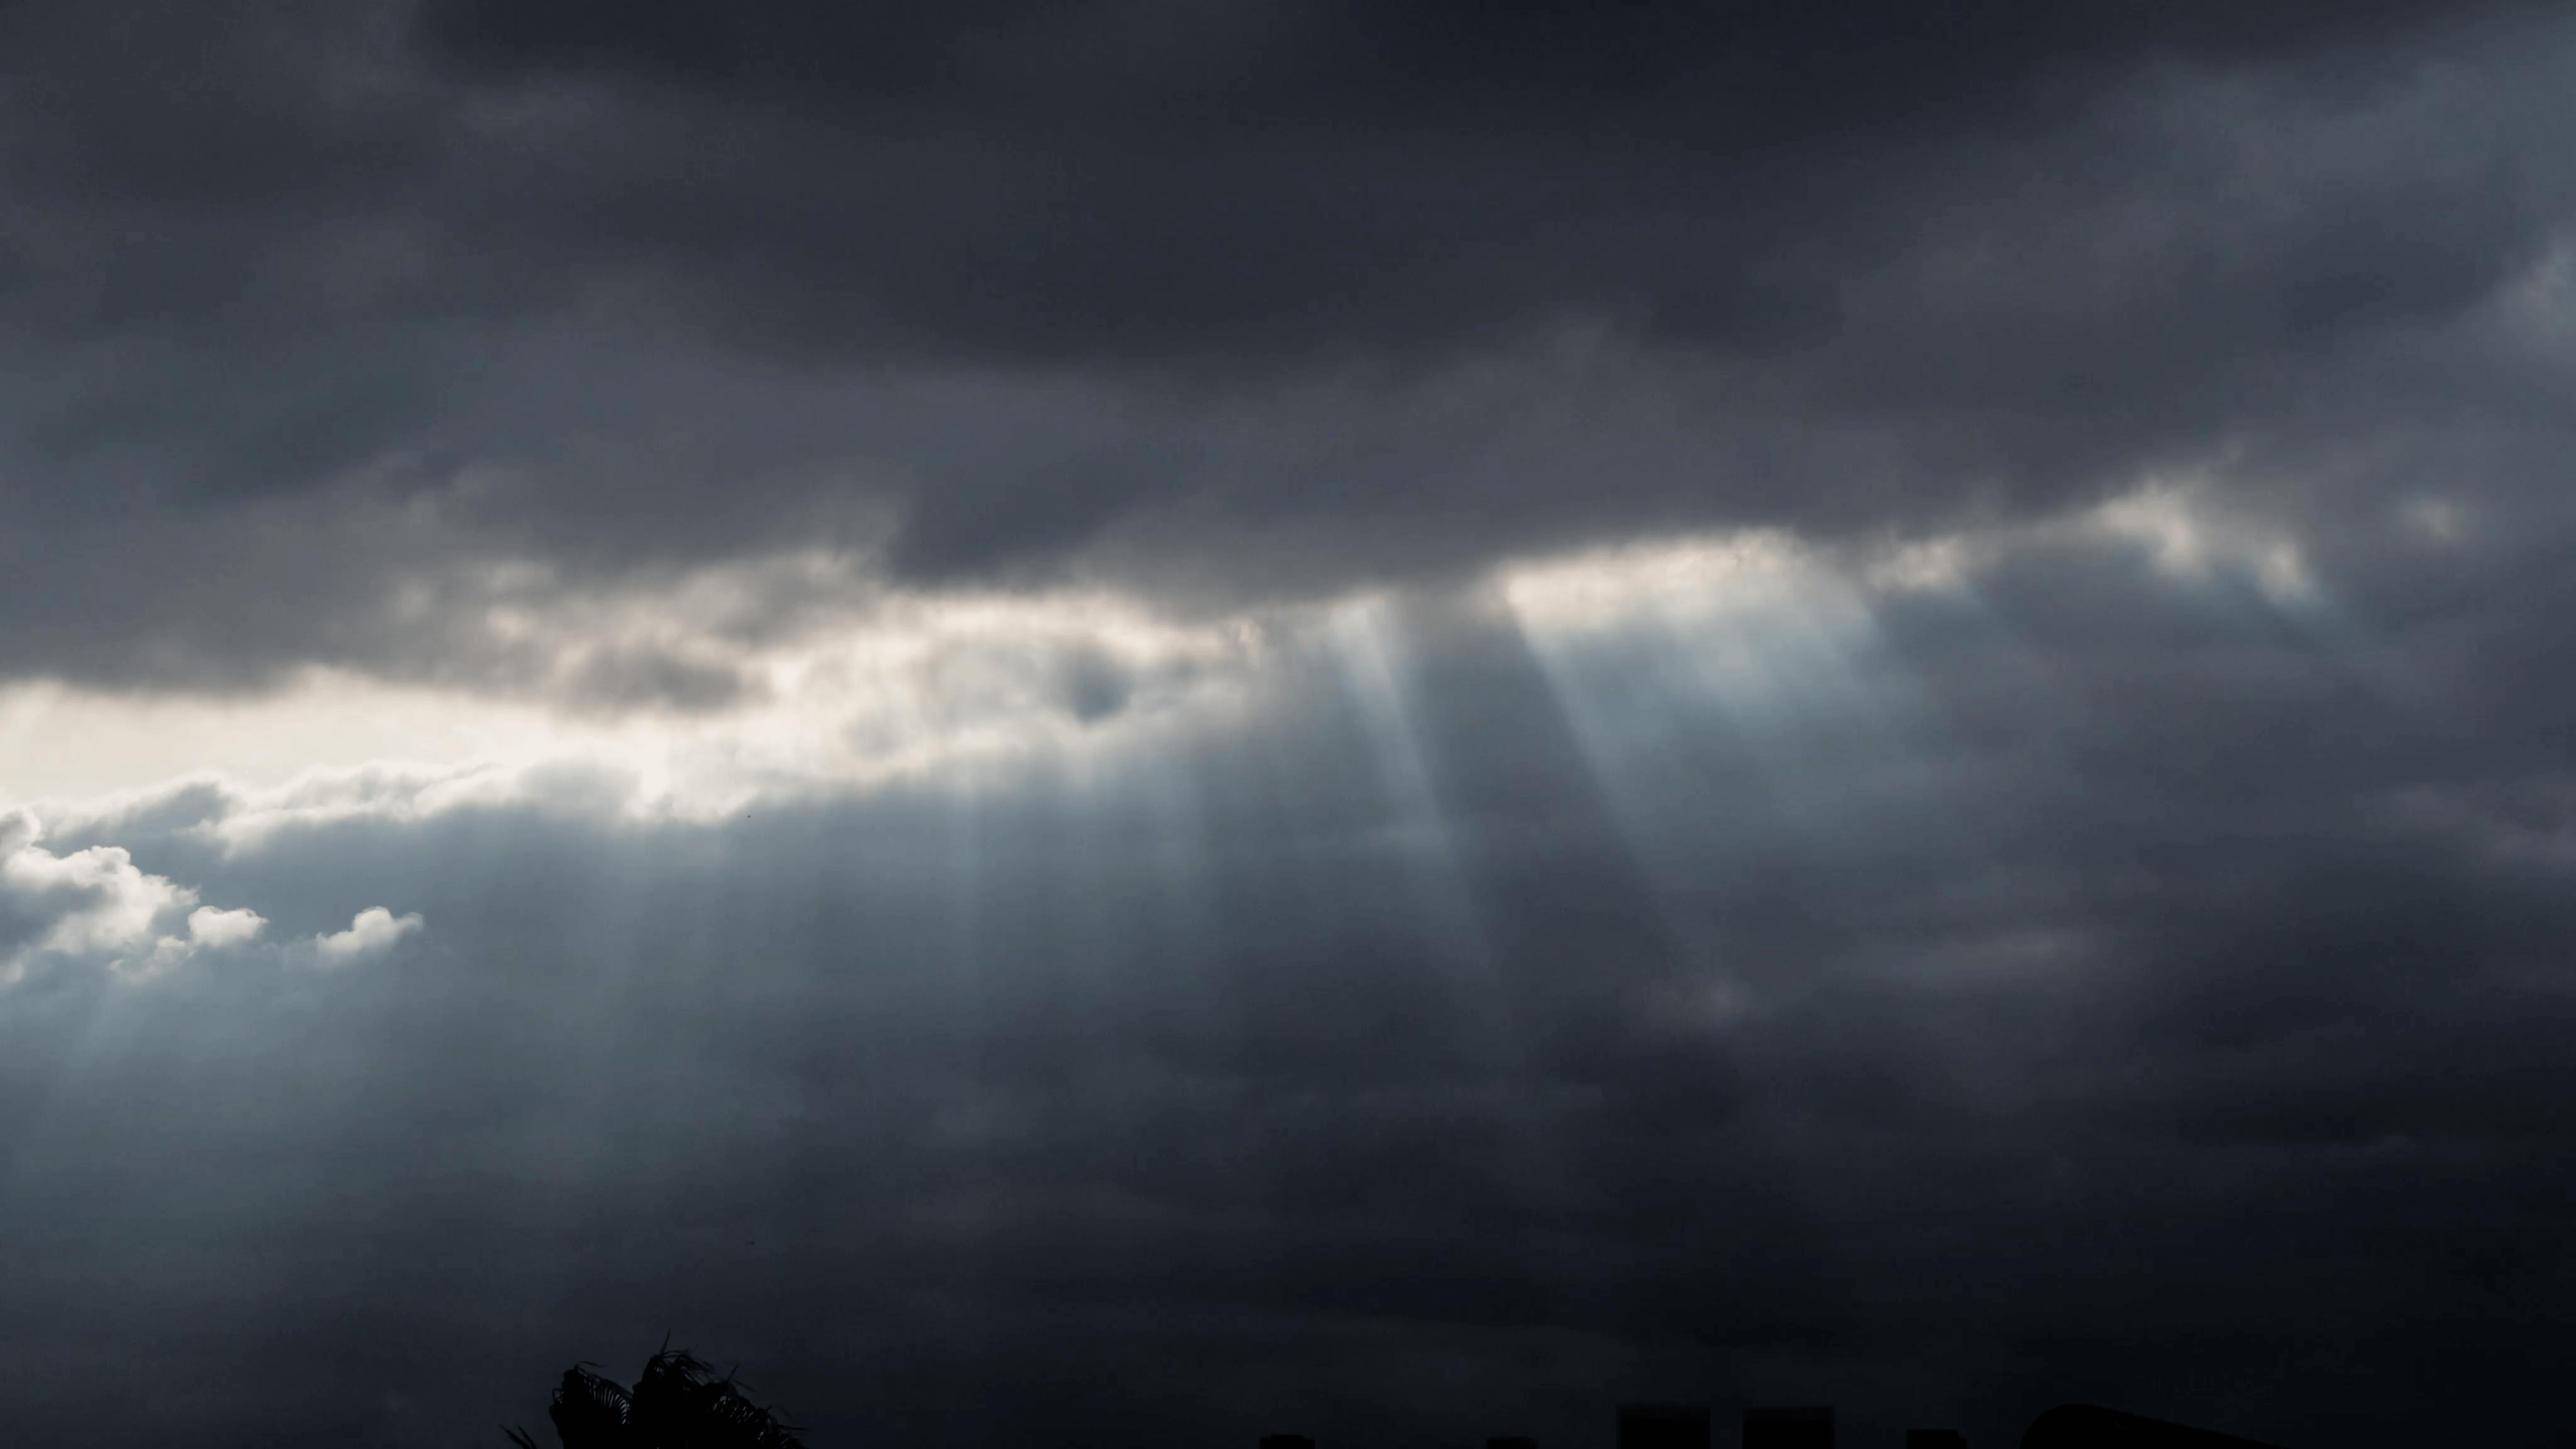 Rays of sunlight shining through rainy storm clouds background. 4K